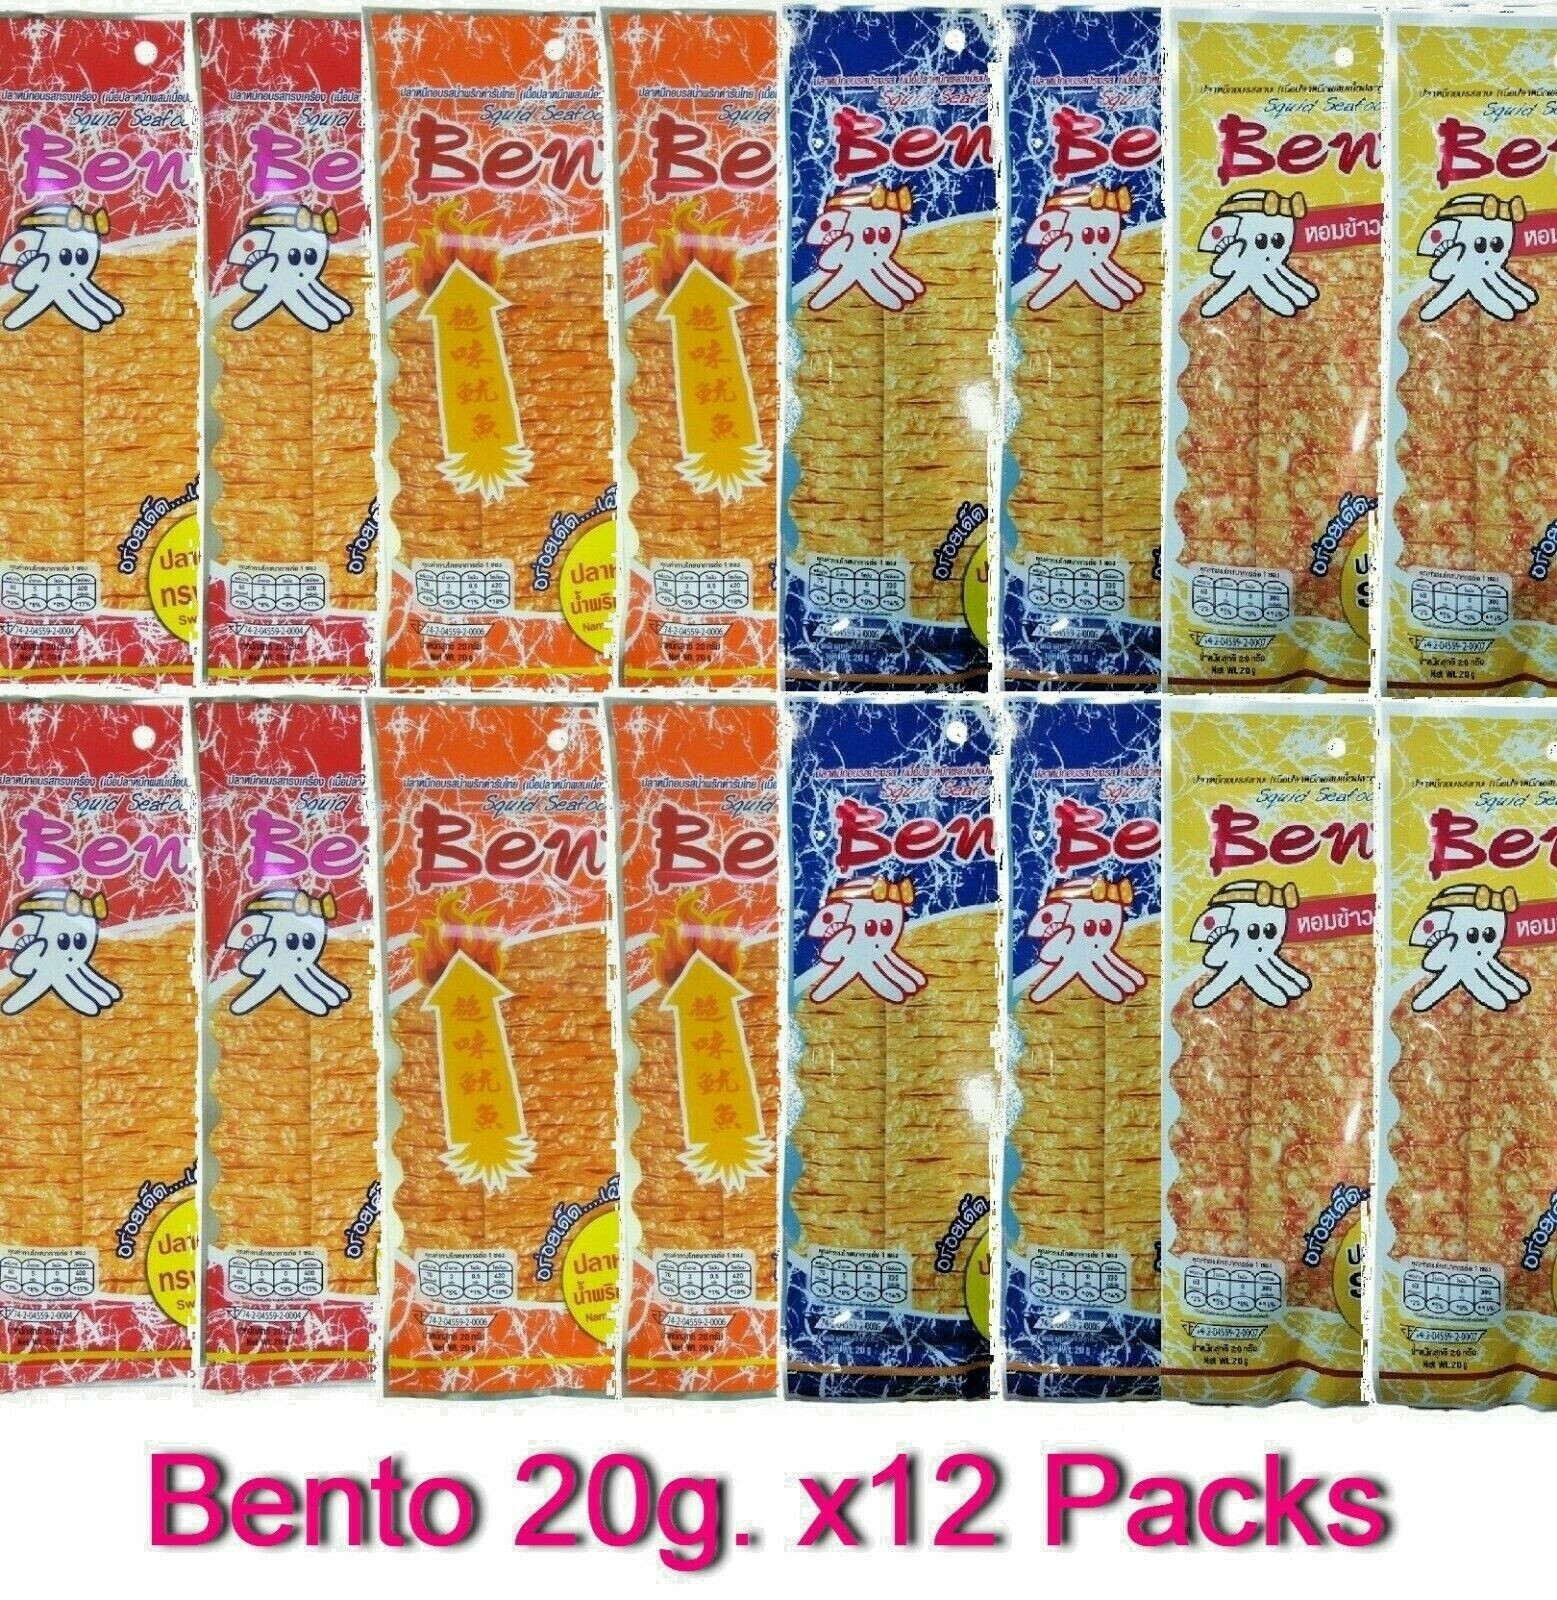 20g x 12 Packs BENTO THAI SQUID SEAFOOD SNACK DELICIOUS SWEET SPICY Flavour +TN